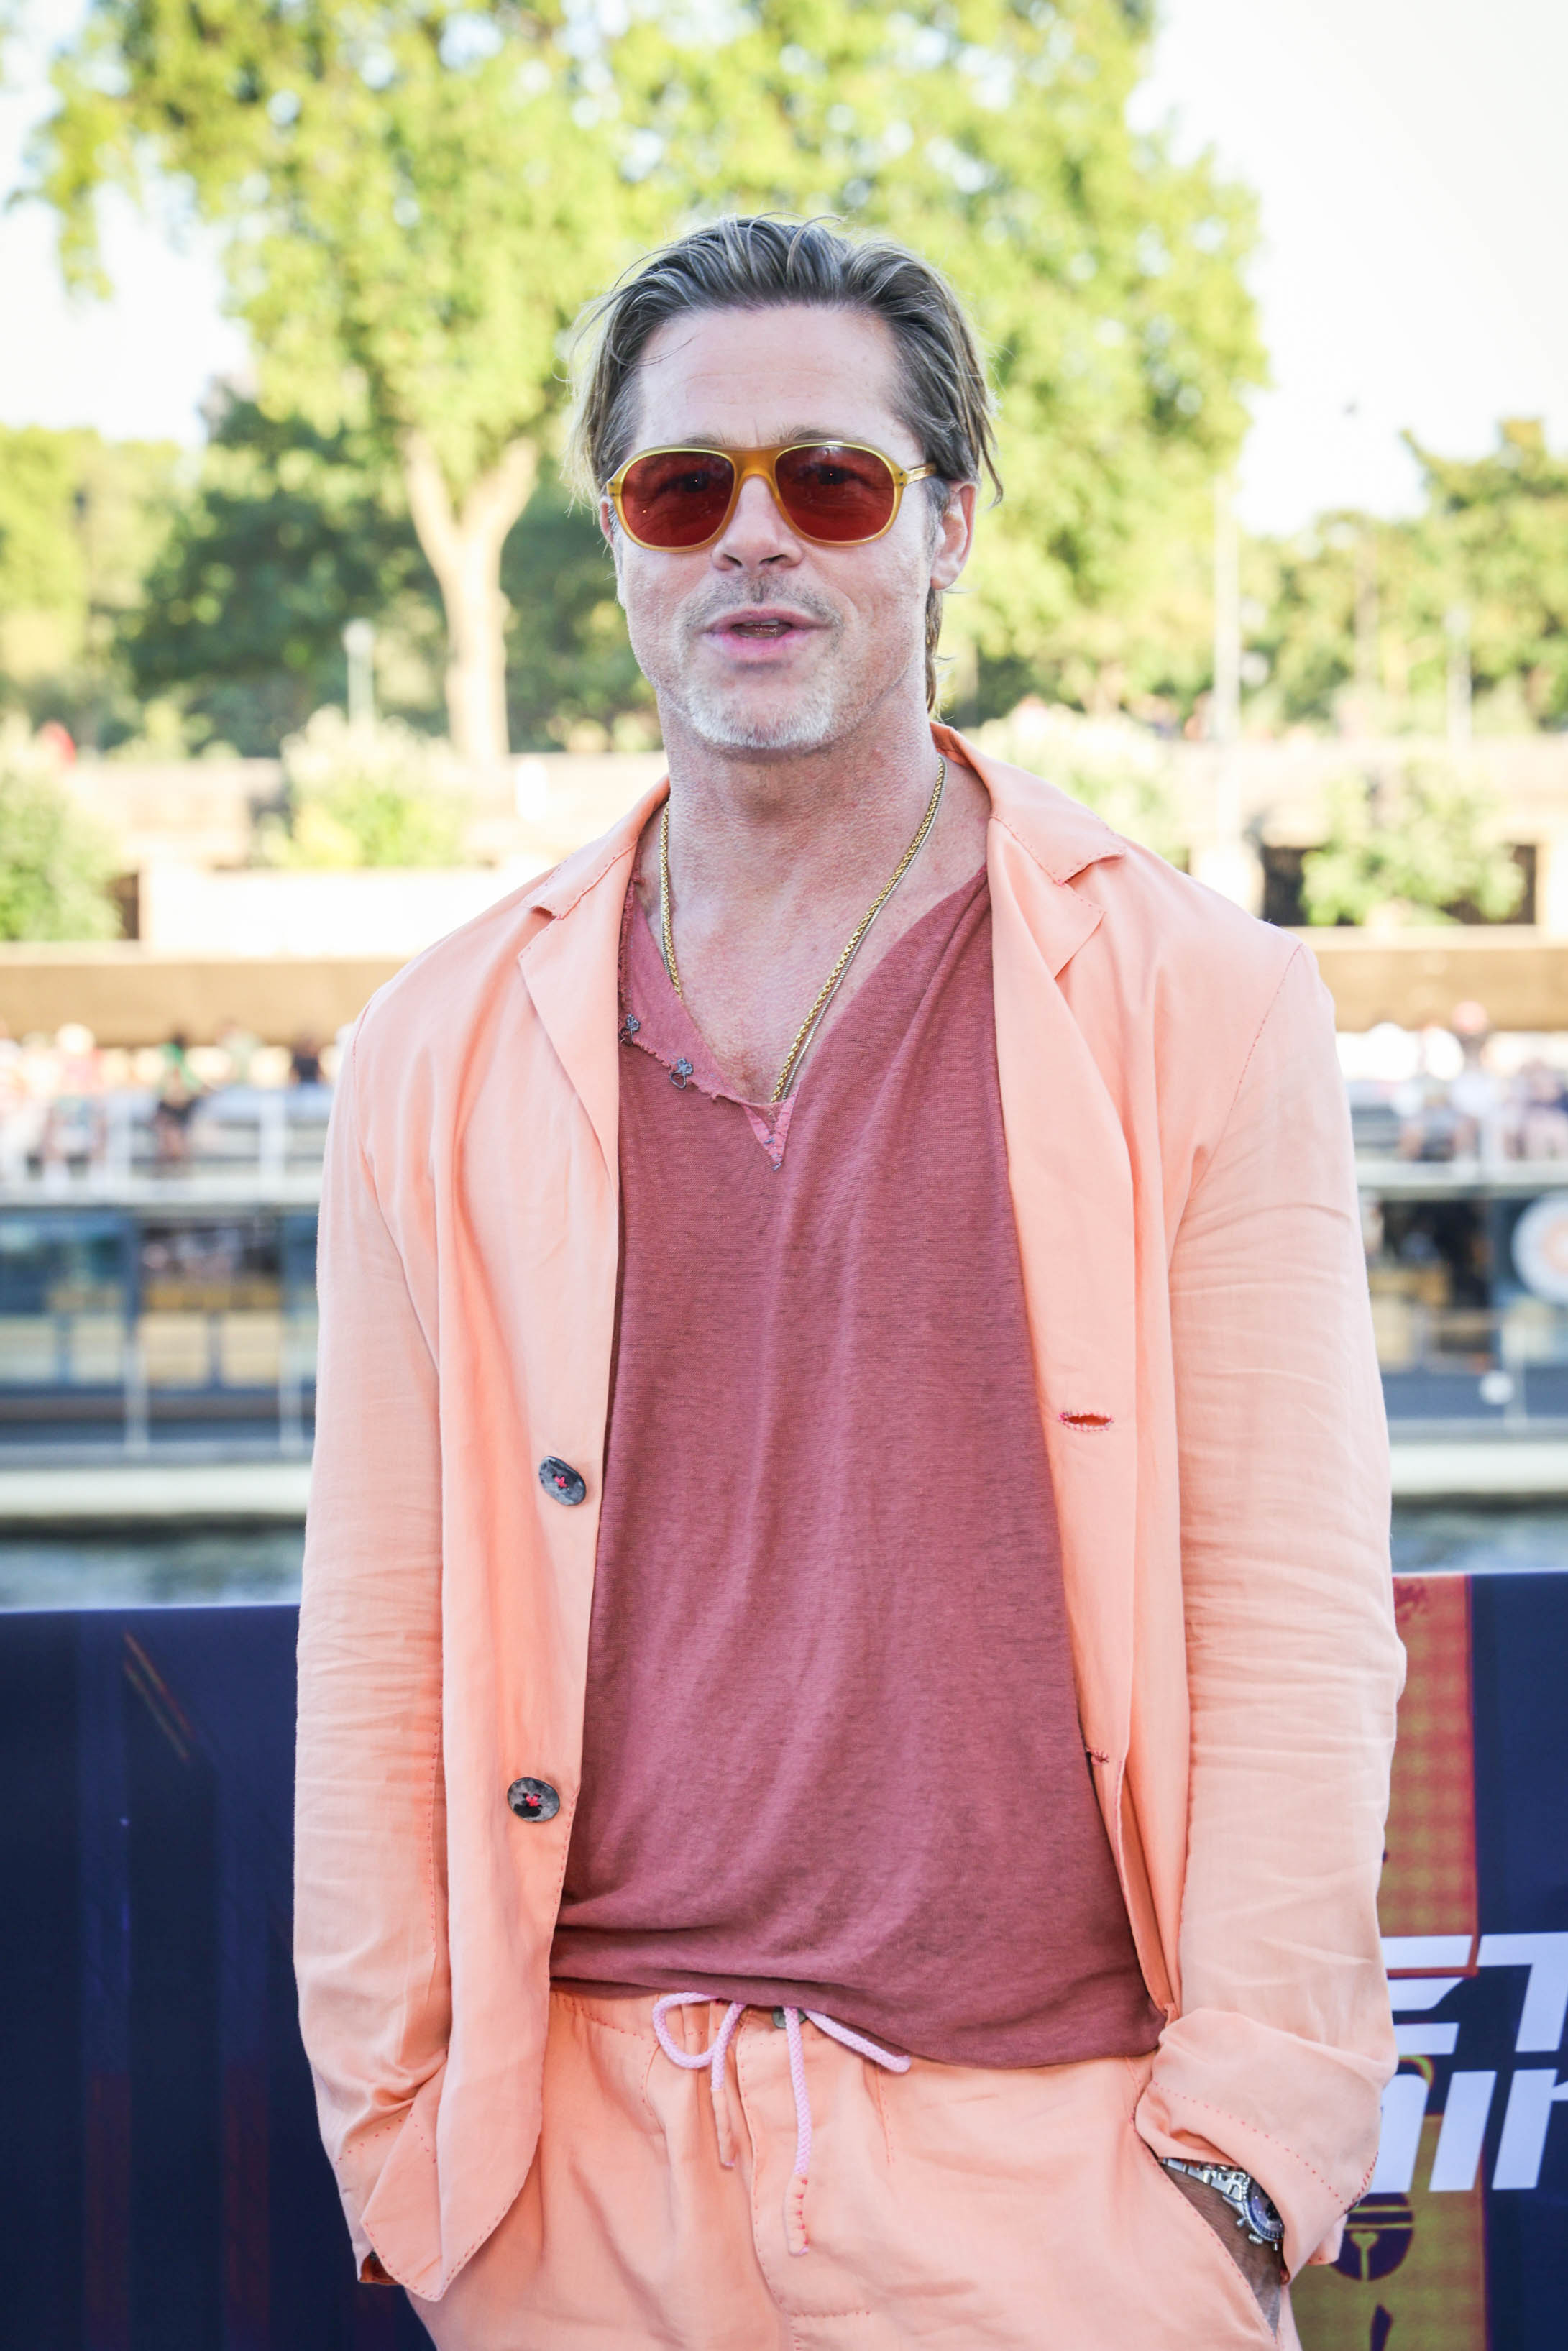 Brad Pitt Street Style: How to Get His Effortlessly Cool Look